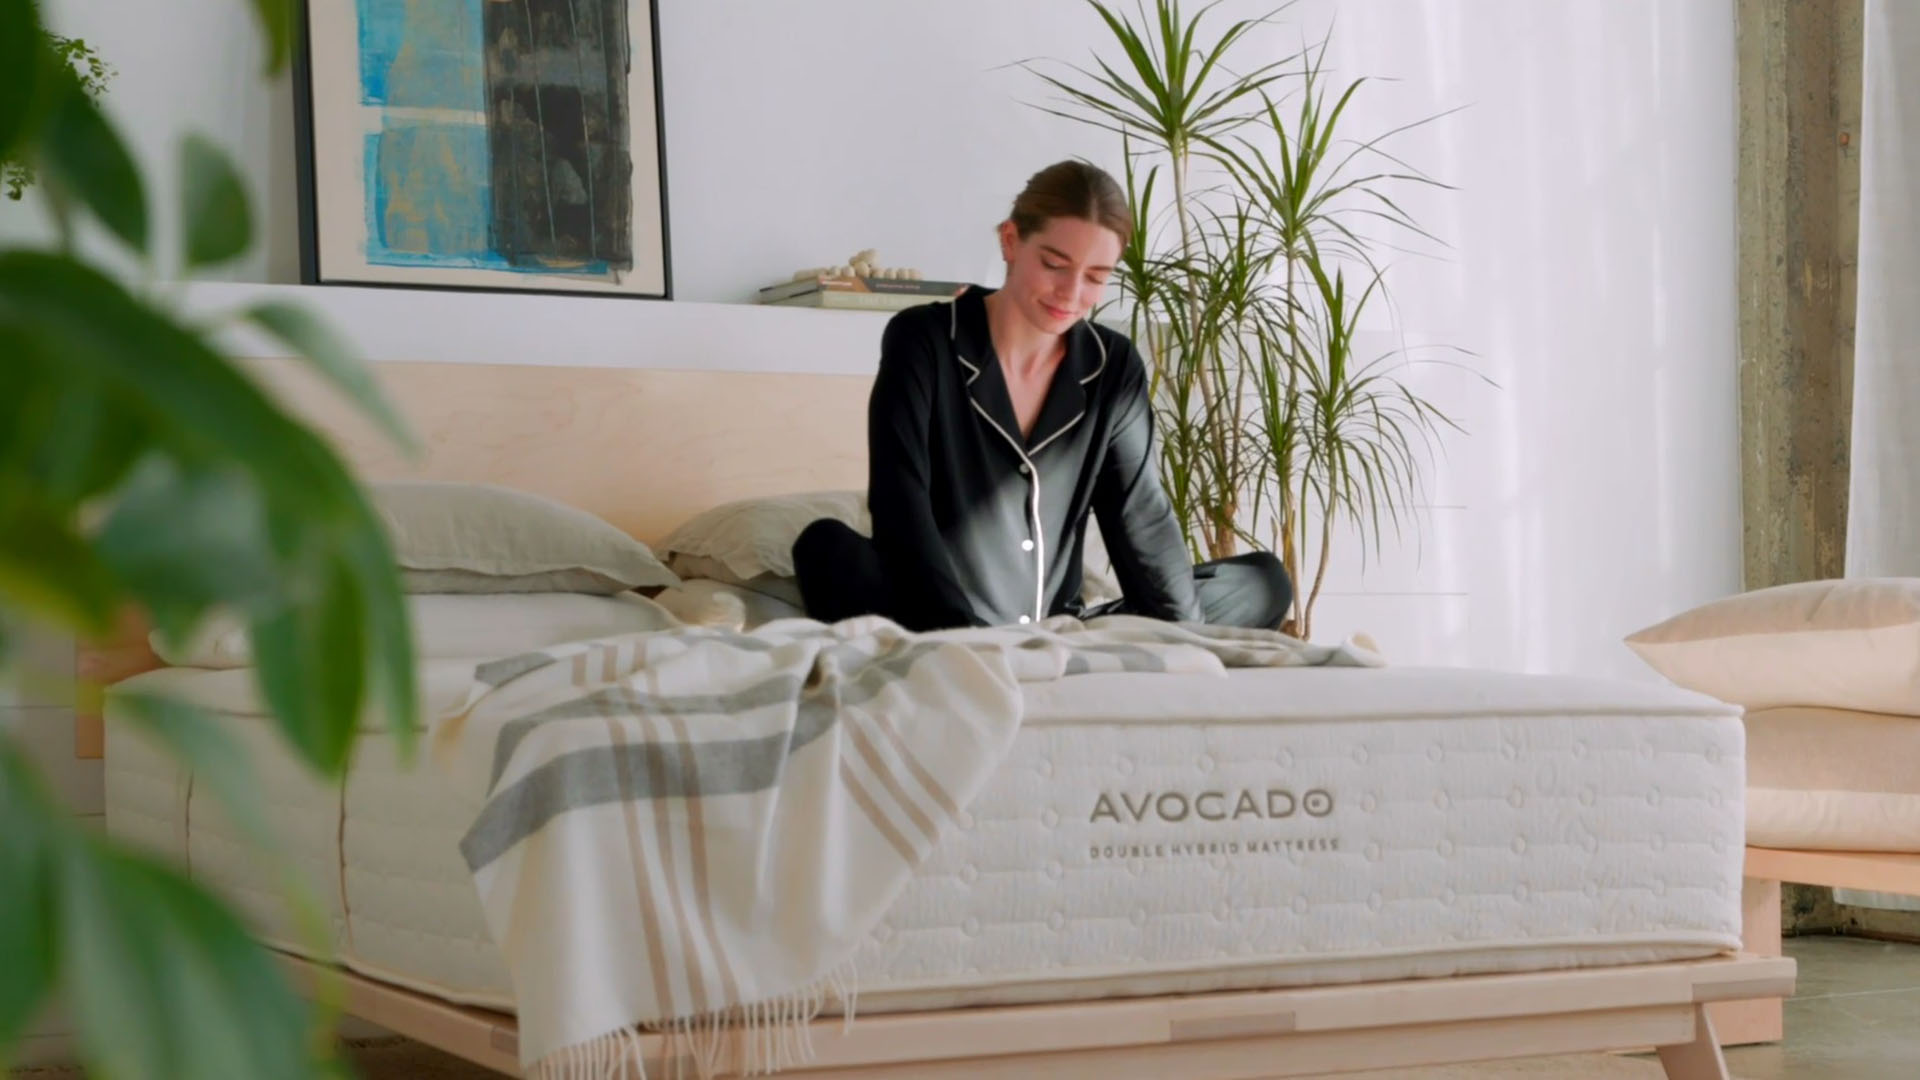 Where to buy Avocado Mattress in Downers Grove, Illinois